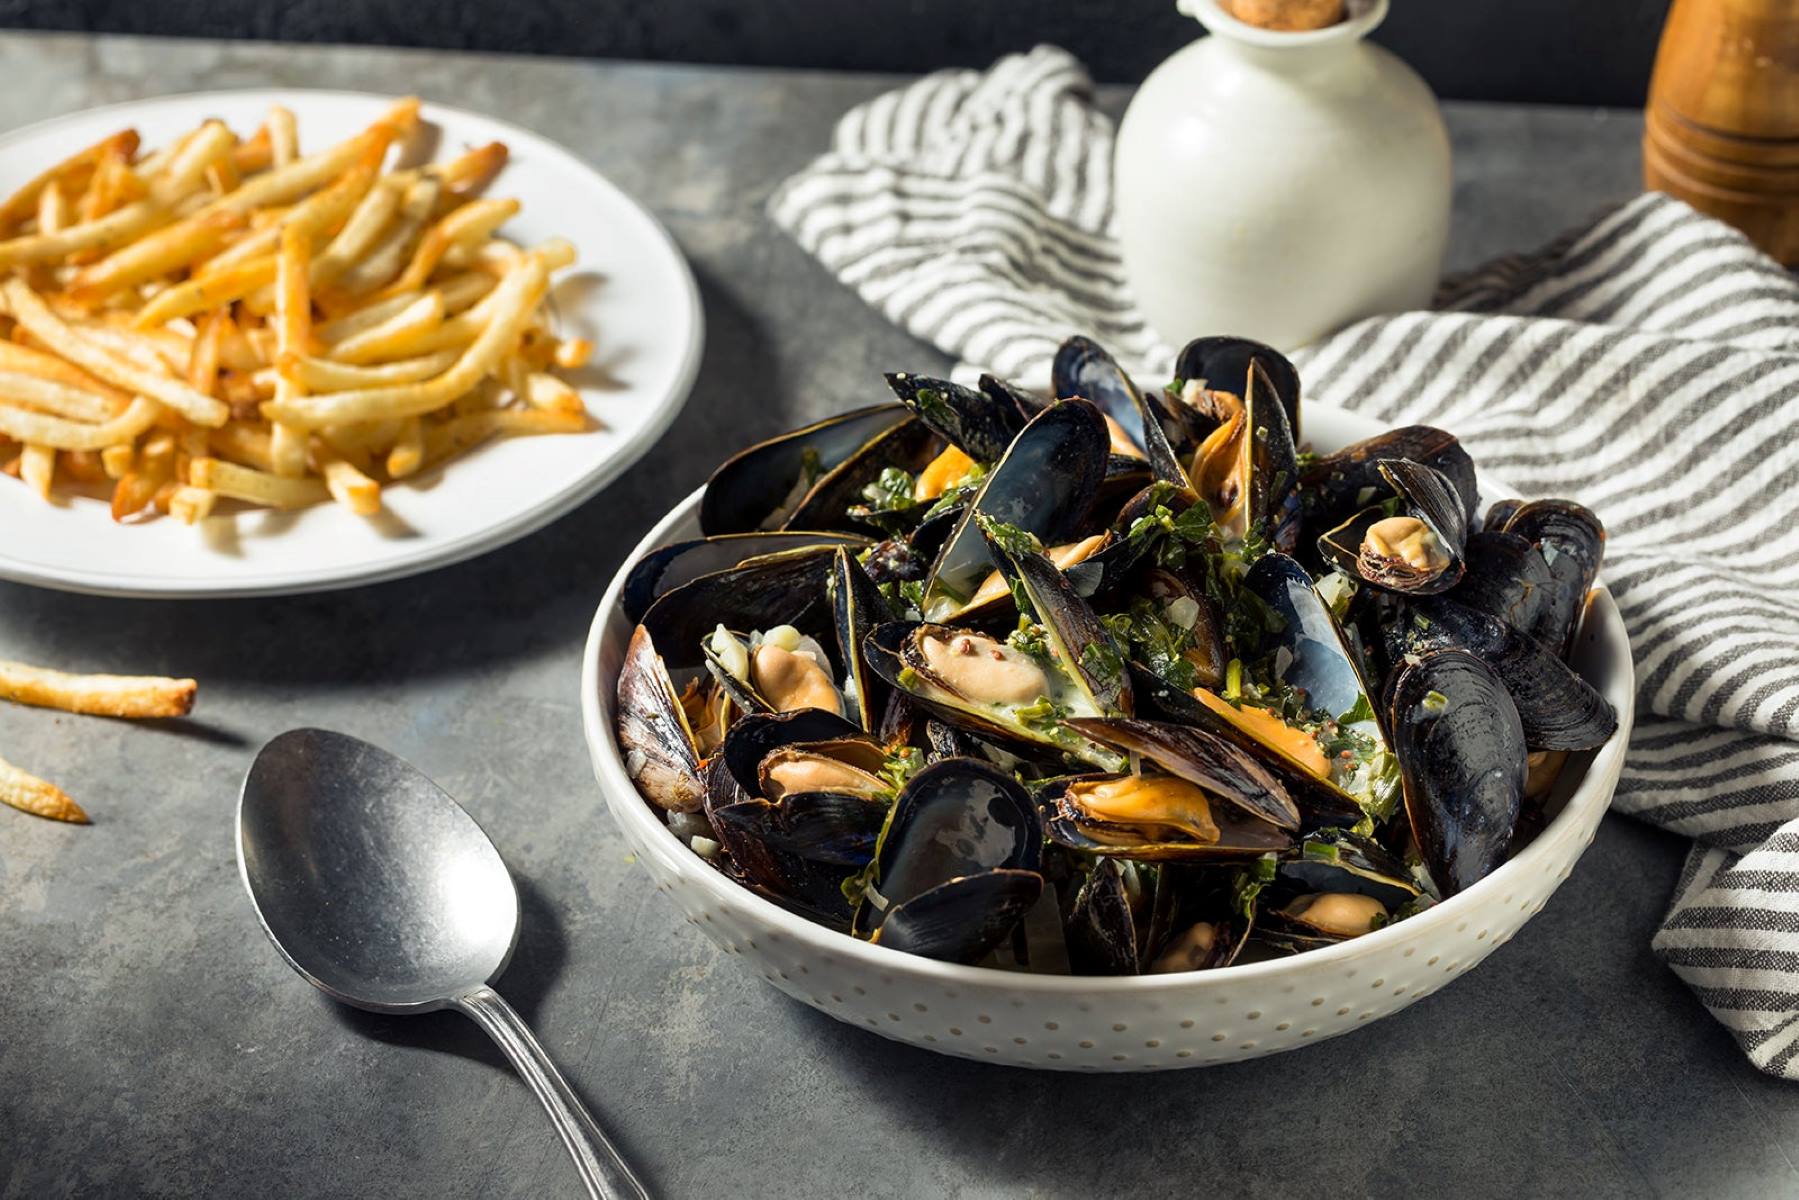 Discover The Exquisite Delicacy Of Belgium Mussels - A Must-Try Dish From Around The World